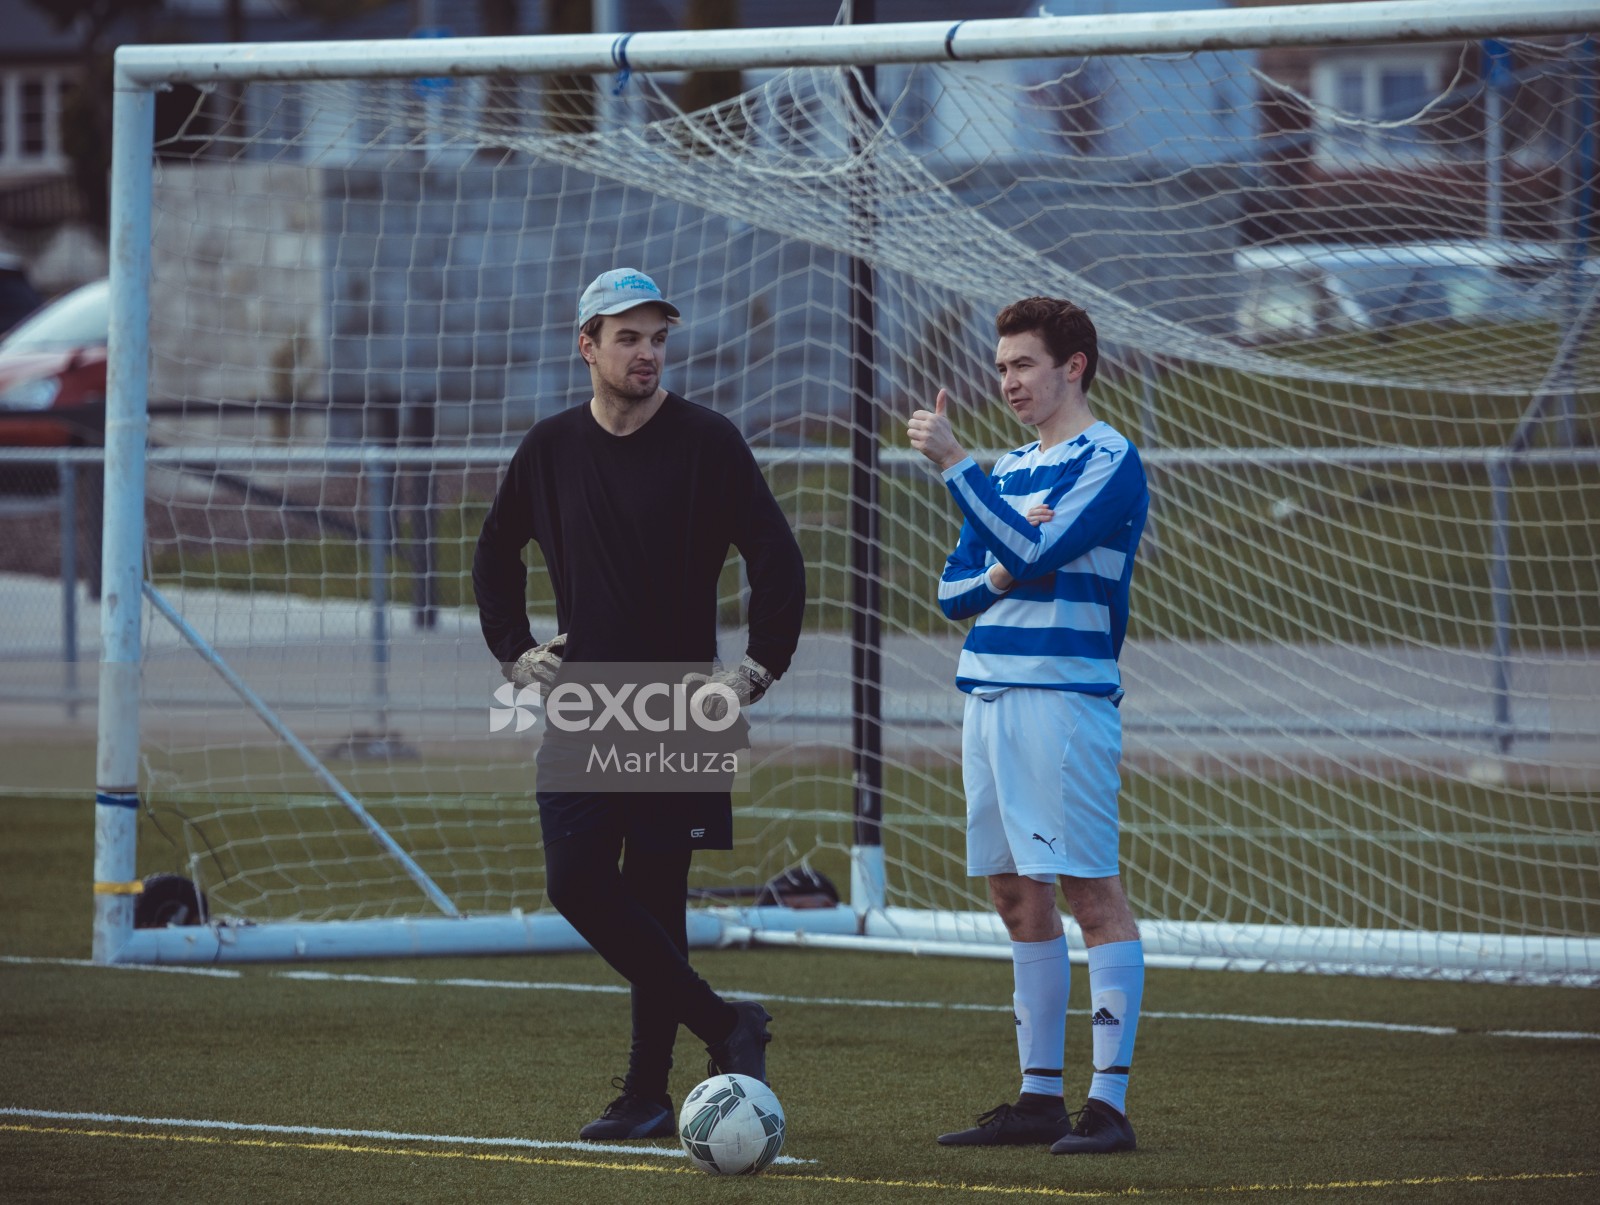 Player and goalkeeper standing at the goal post - Sports Zone sunday league